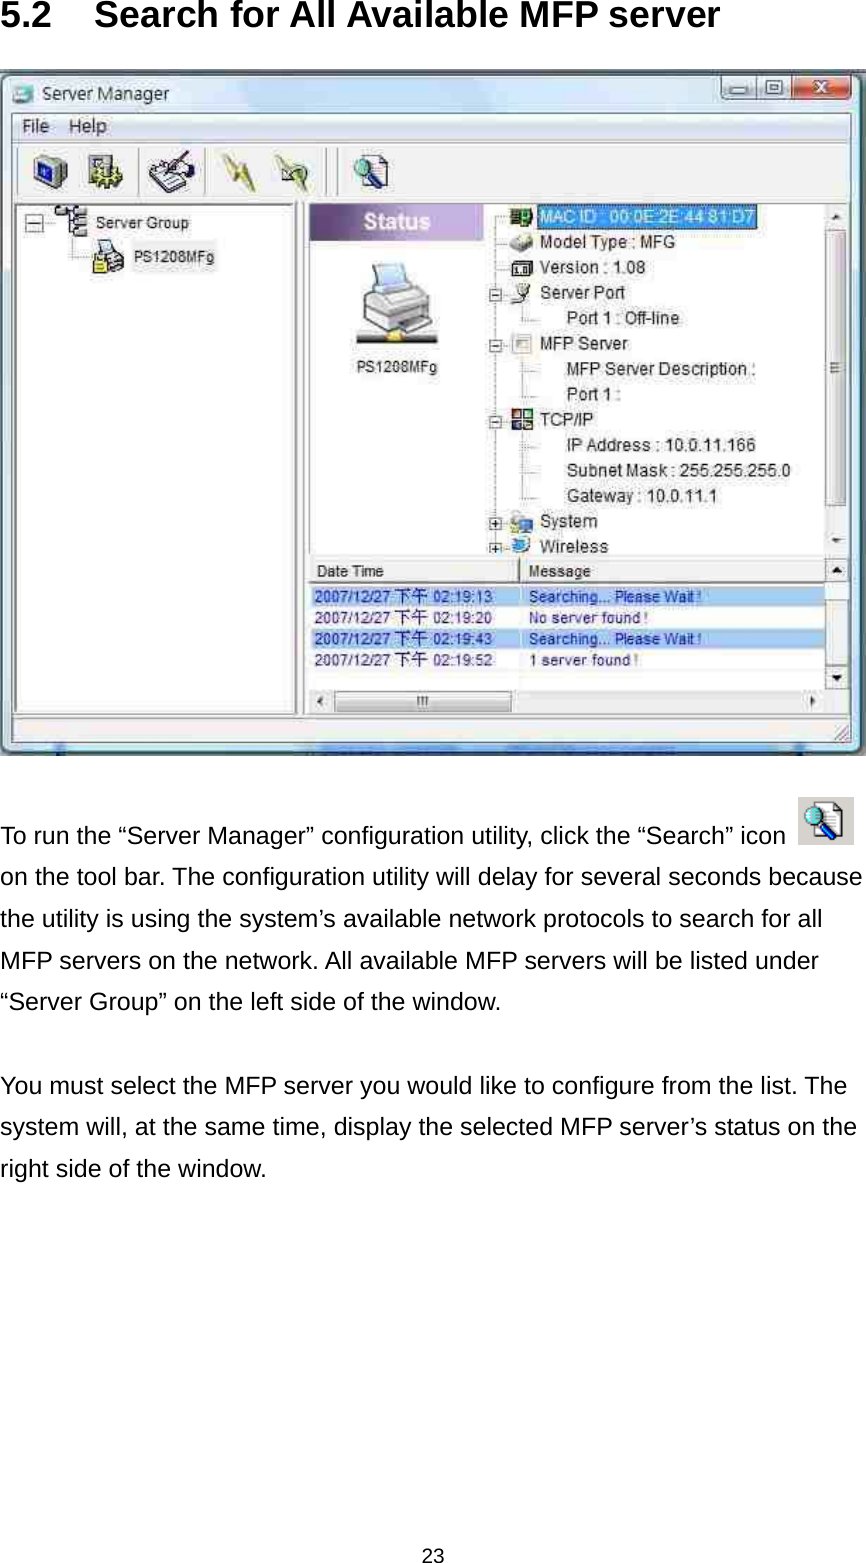 23 5.2  Search for All Available MFP server   To run the “Server Manager” configuration utility, click the “Search” icon   on the tool bar. The configuration utility will delay for several seconds because the utility is using the system’s available network protocols to search for all MFP servers on the network. All available MFP servers will be listed under “Server Group” on the left side of the window.    You must select the MFP server you would like to configure from the list. The system will, at the same time, display the selected MFP server’s status on the right side of the window. 